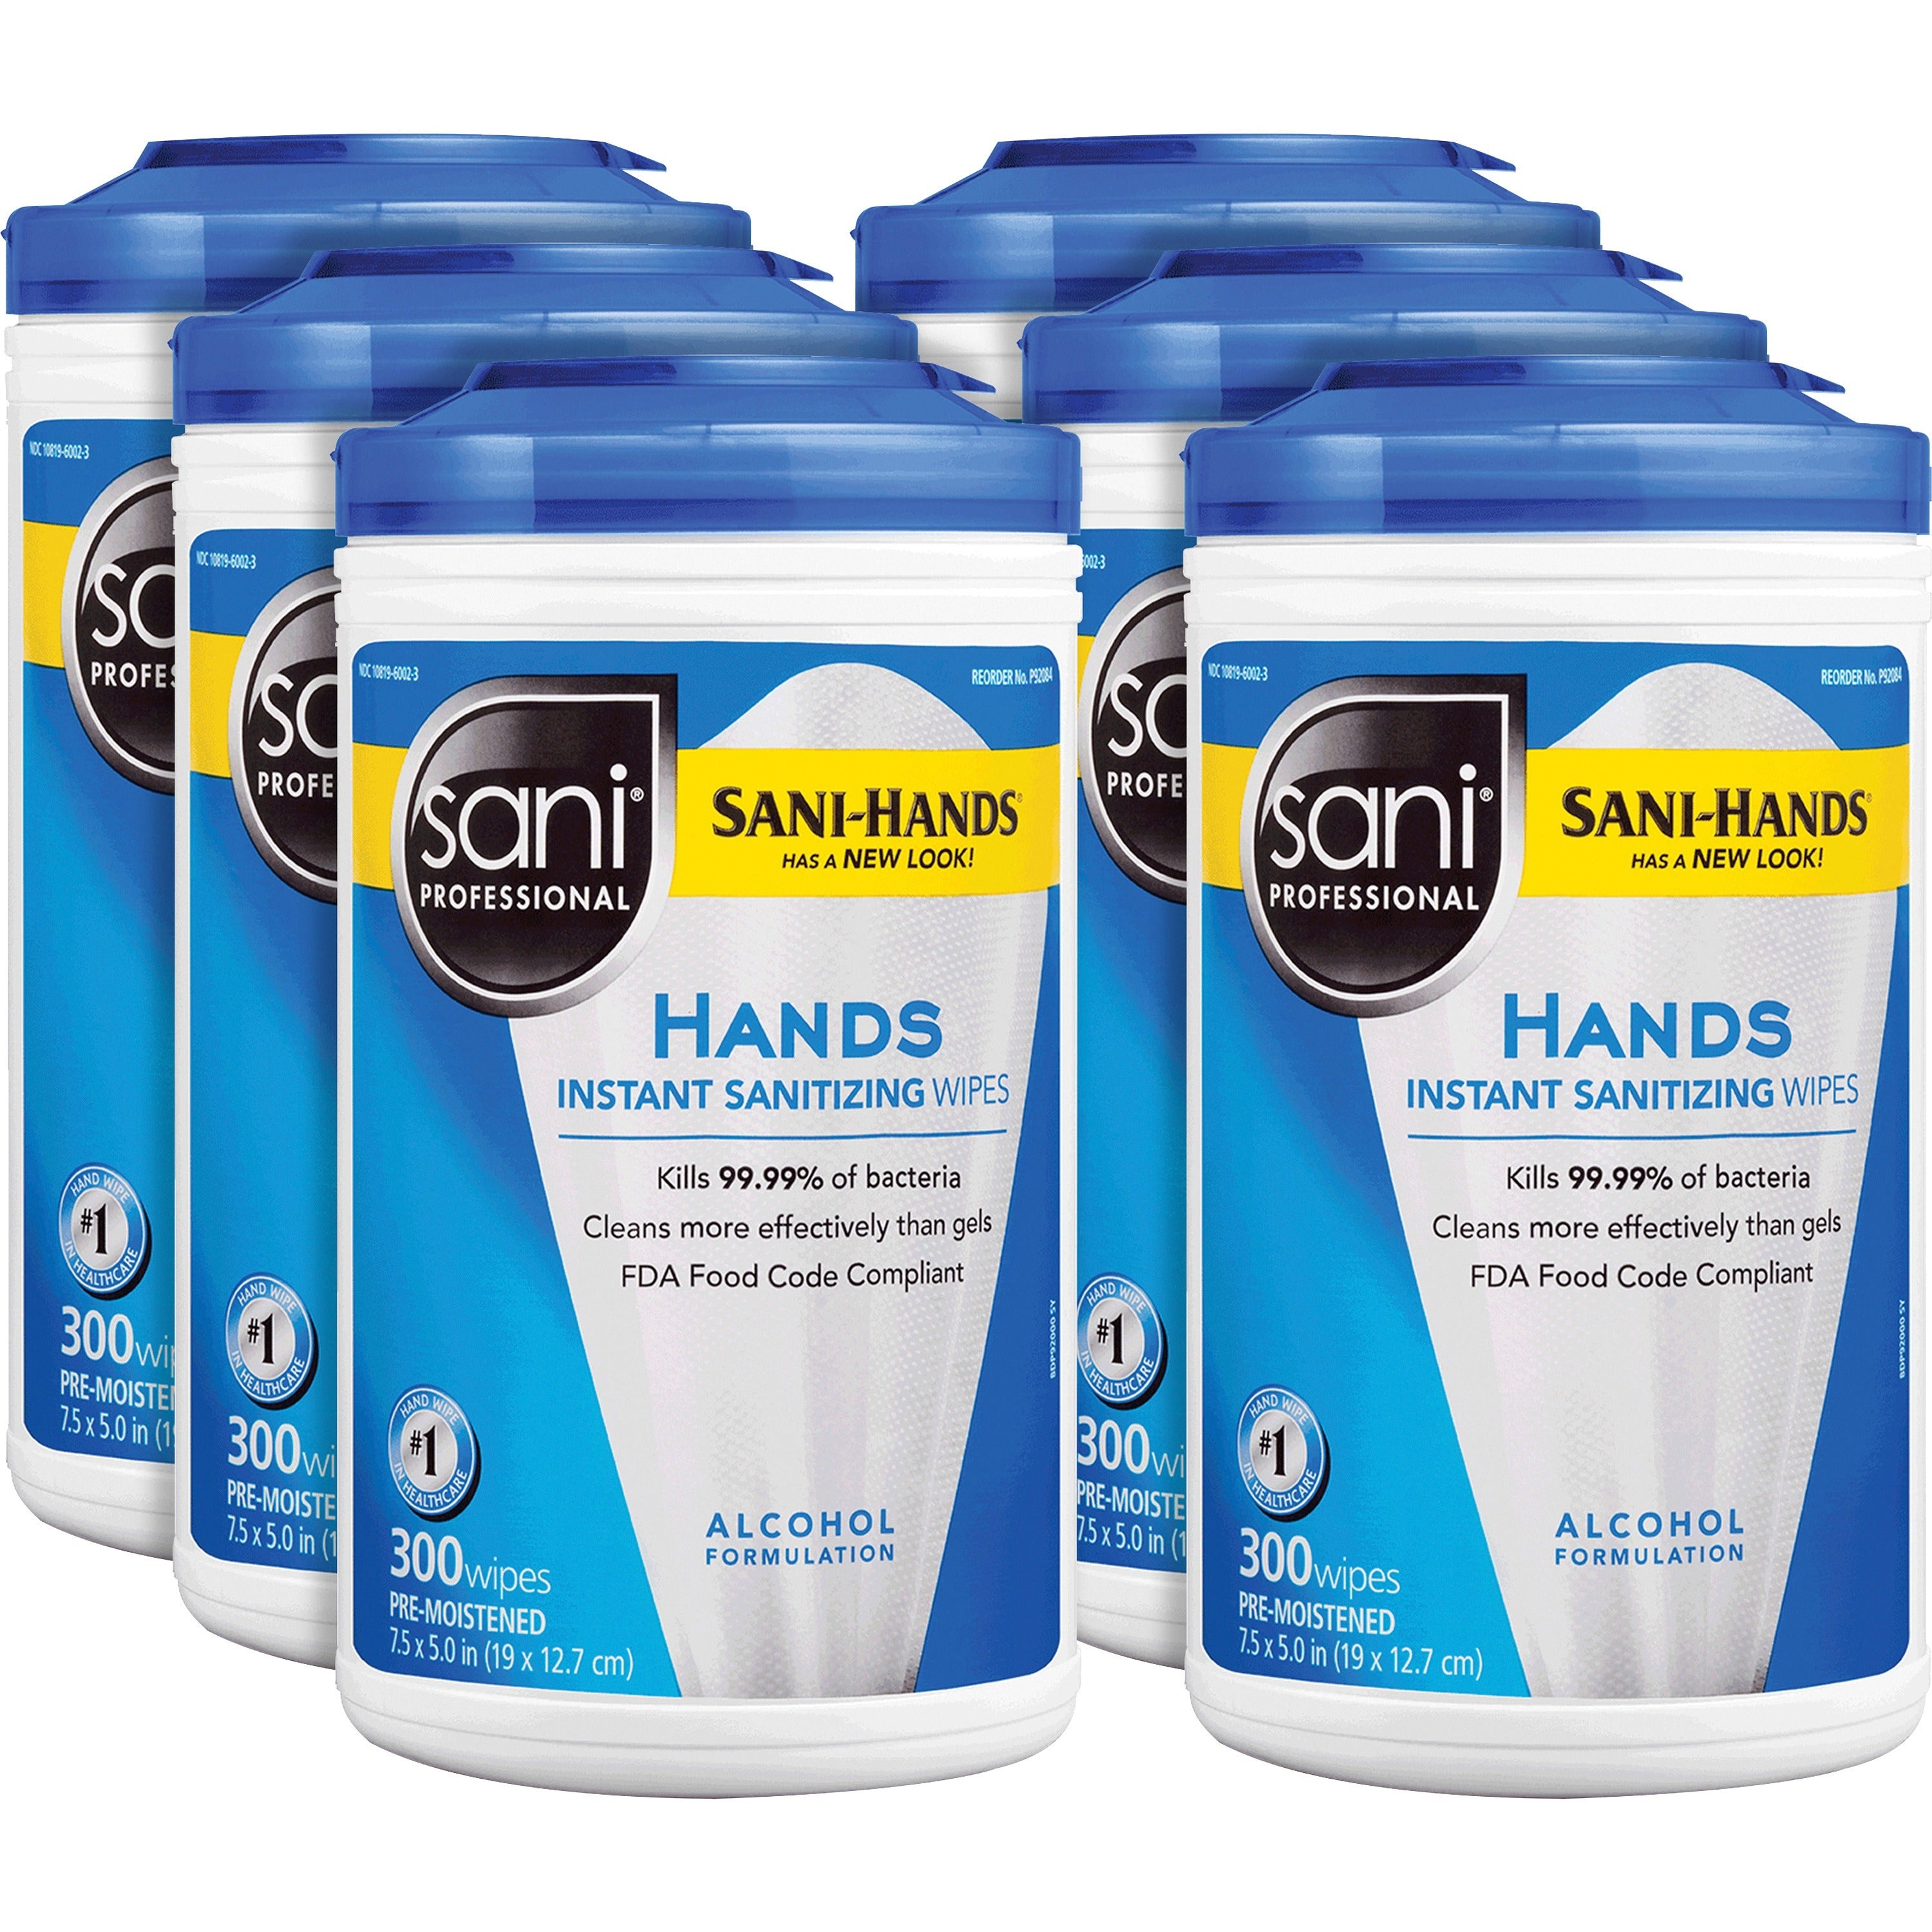 pdi-hands-instant-sanitizing-wipes-white-moisturizing-for-hand-food-service-300-per-canister-6-carton_pdip92084ct - 1